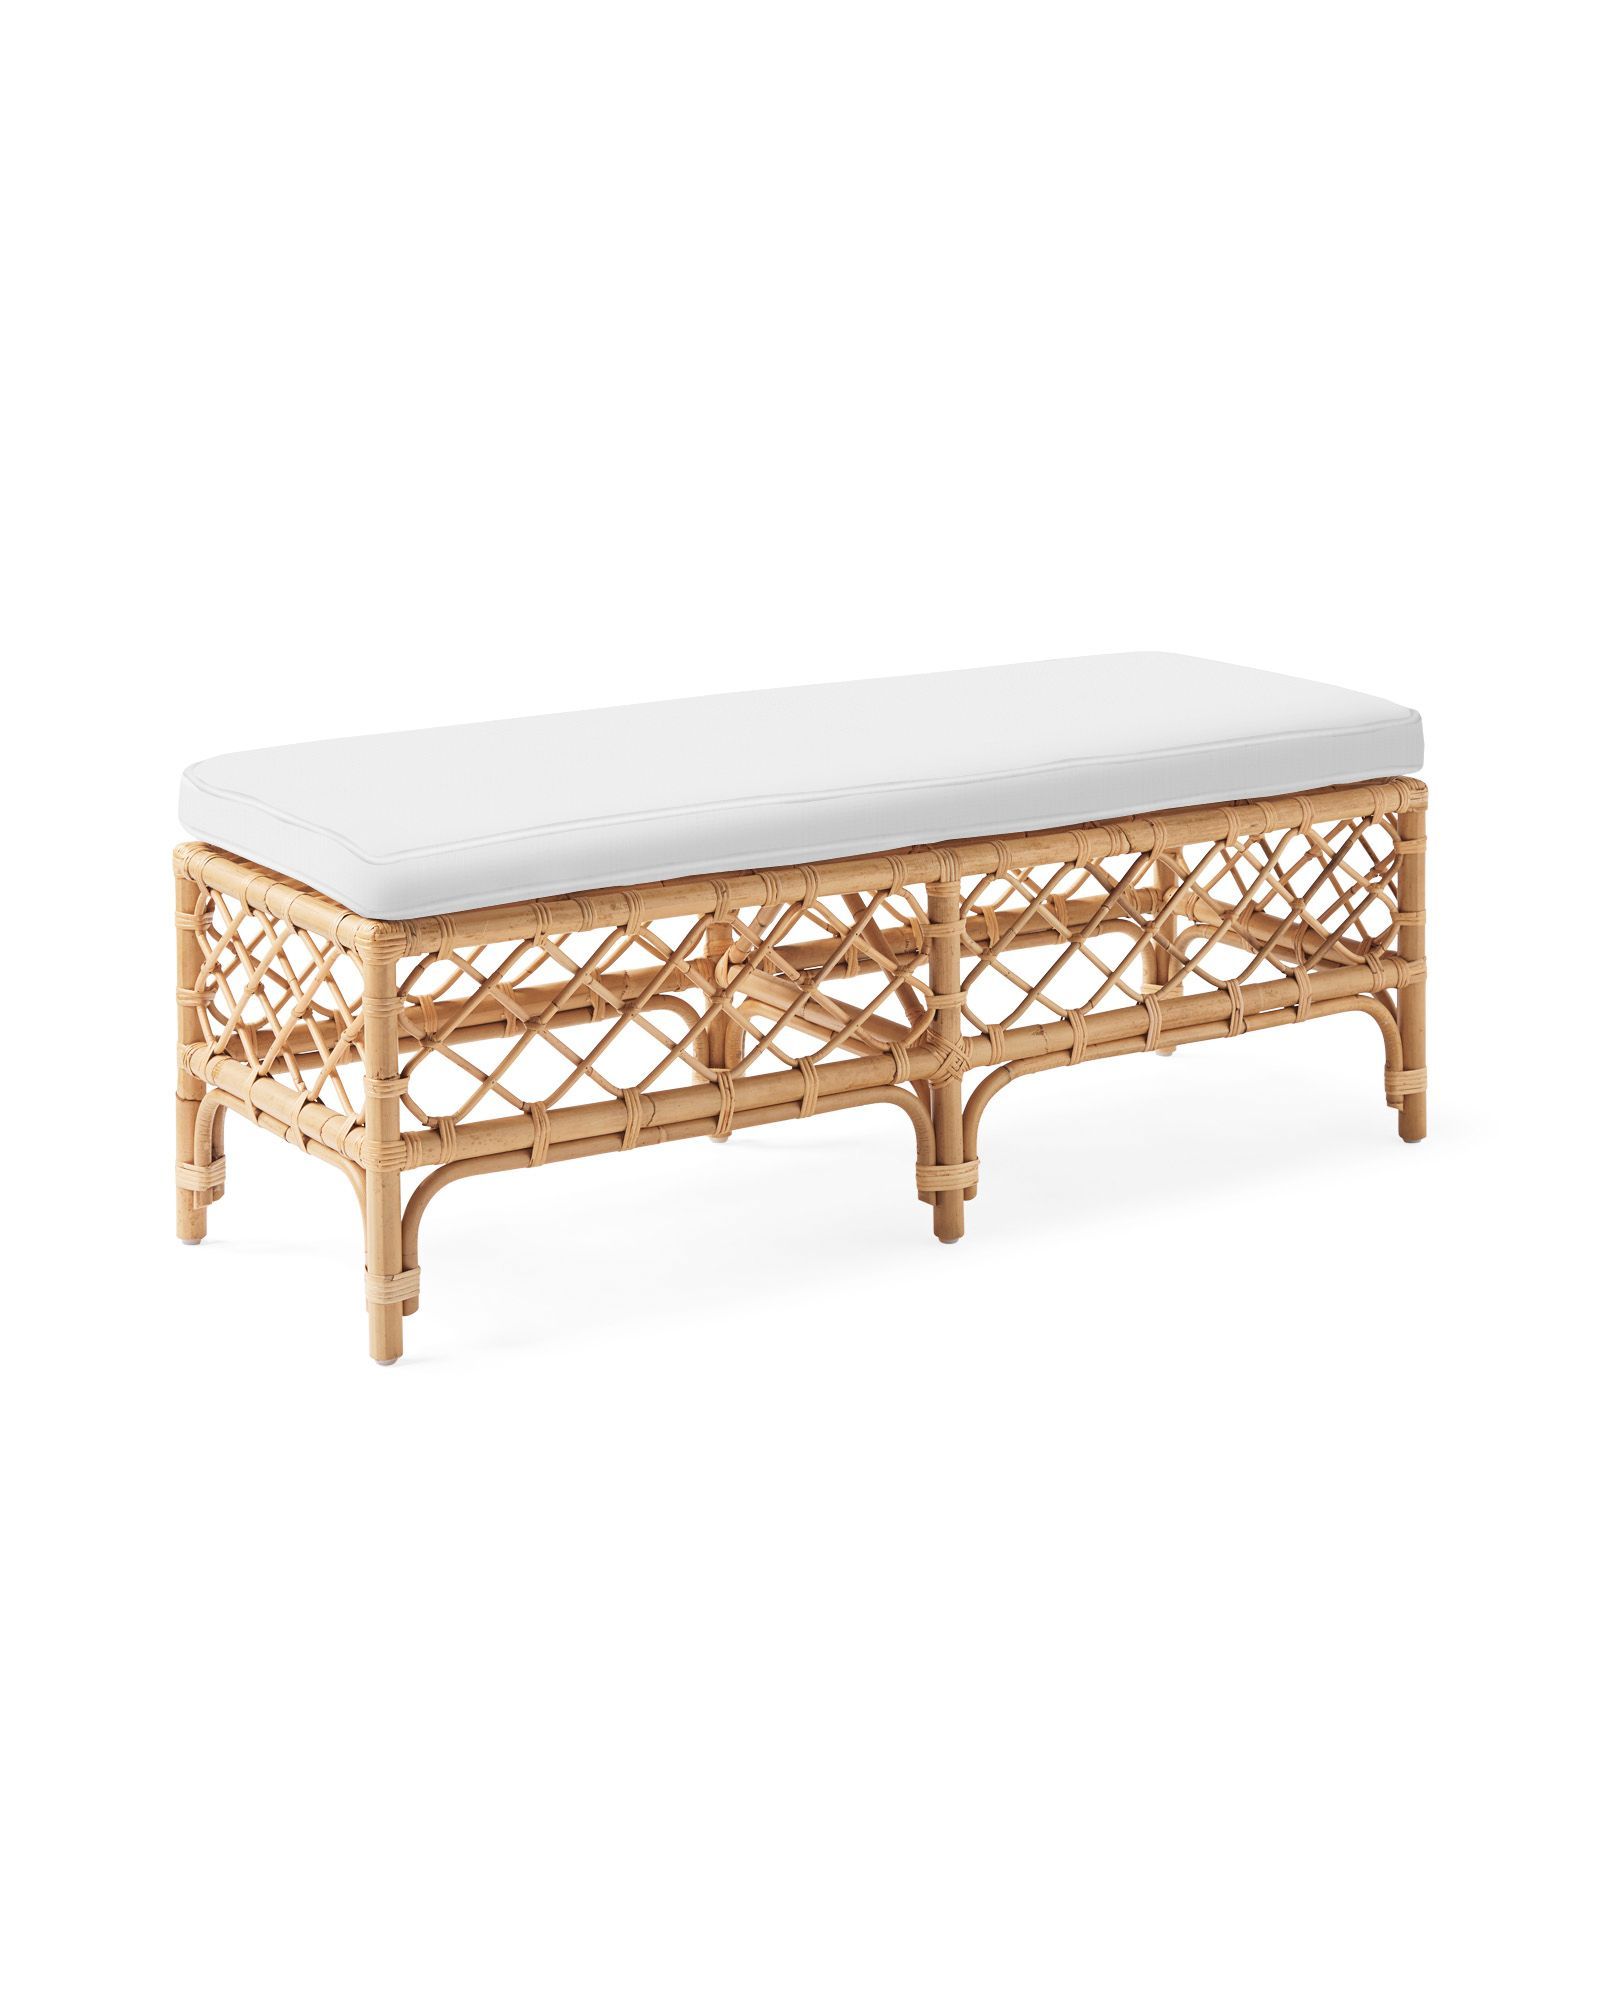 Avalon Rattan Bench | Serena and Lily